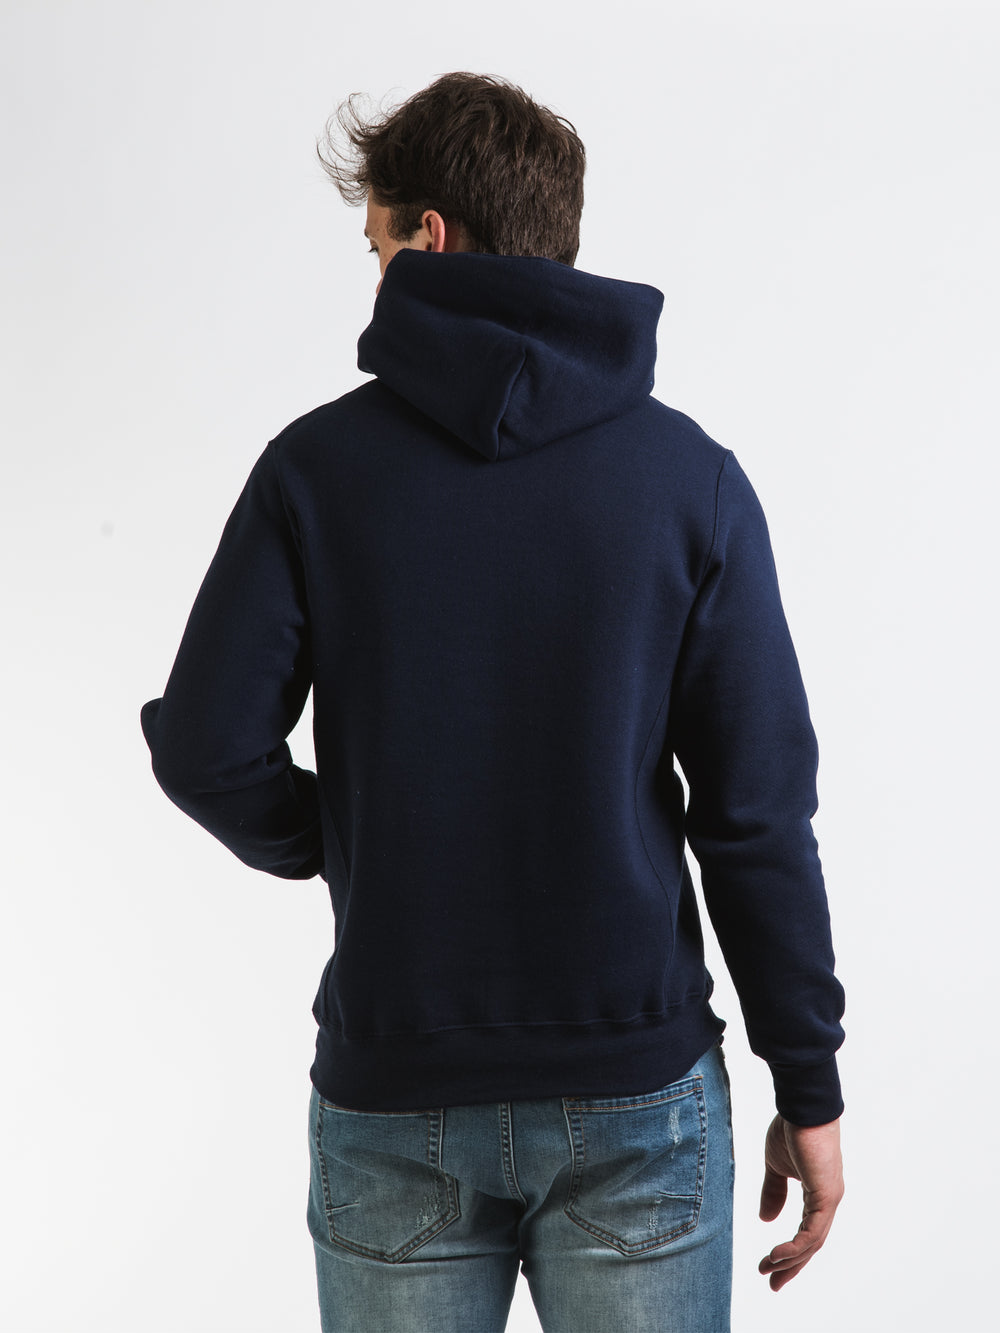 RUSSELL SYRACUSE PULLOVER HOODIE - CLEARANCE